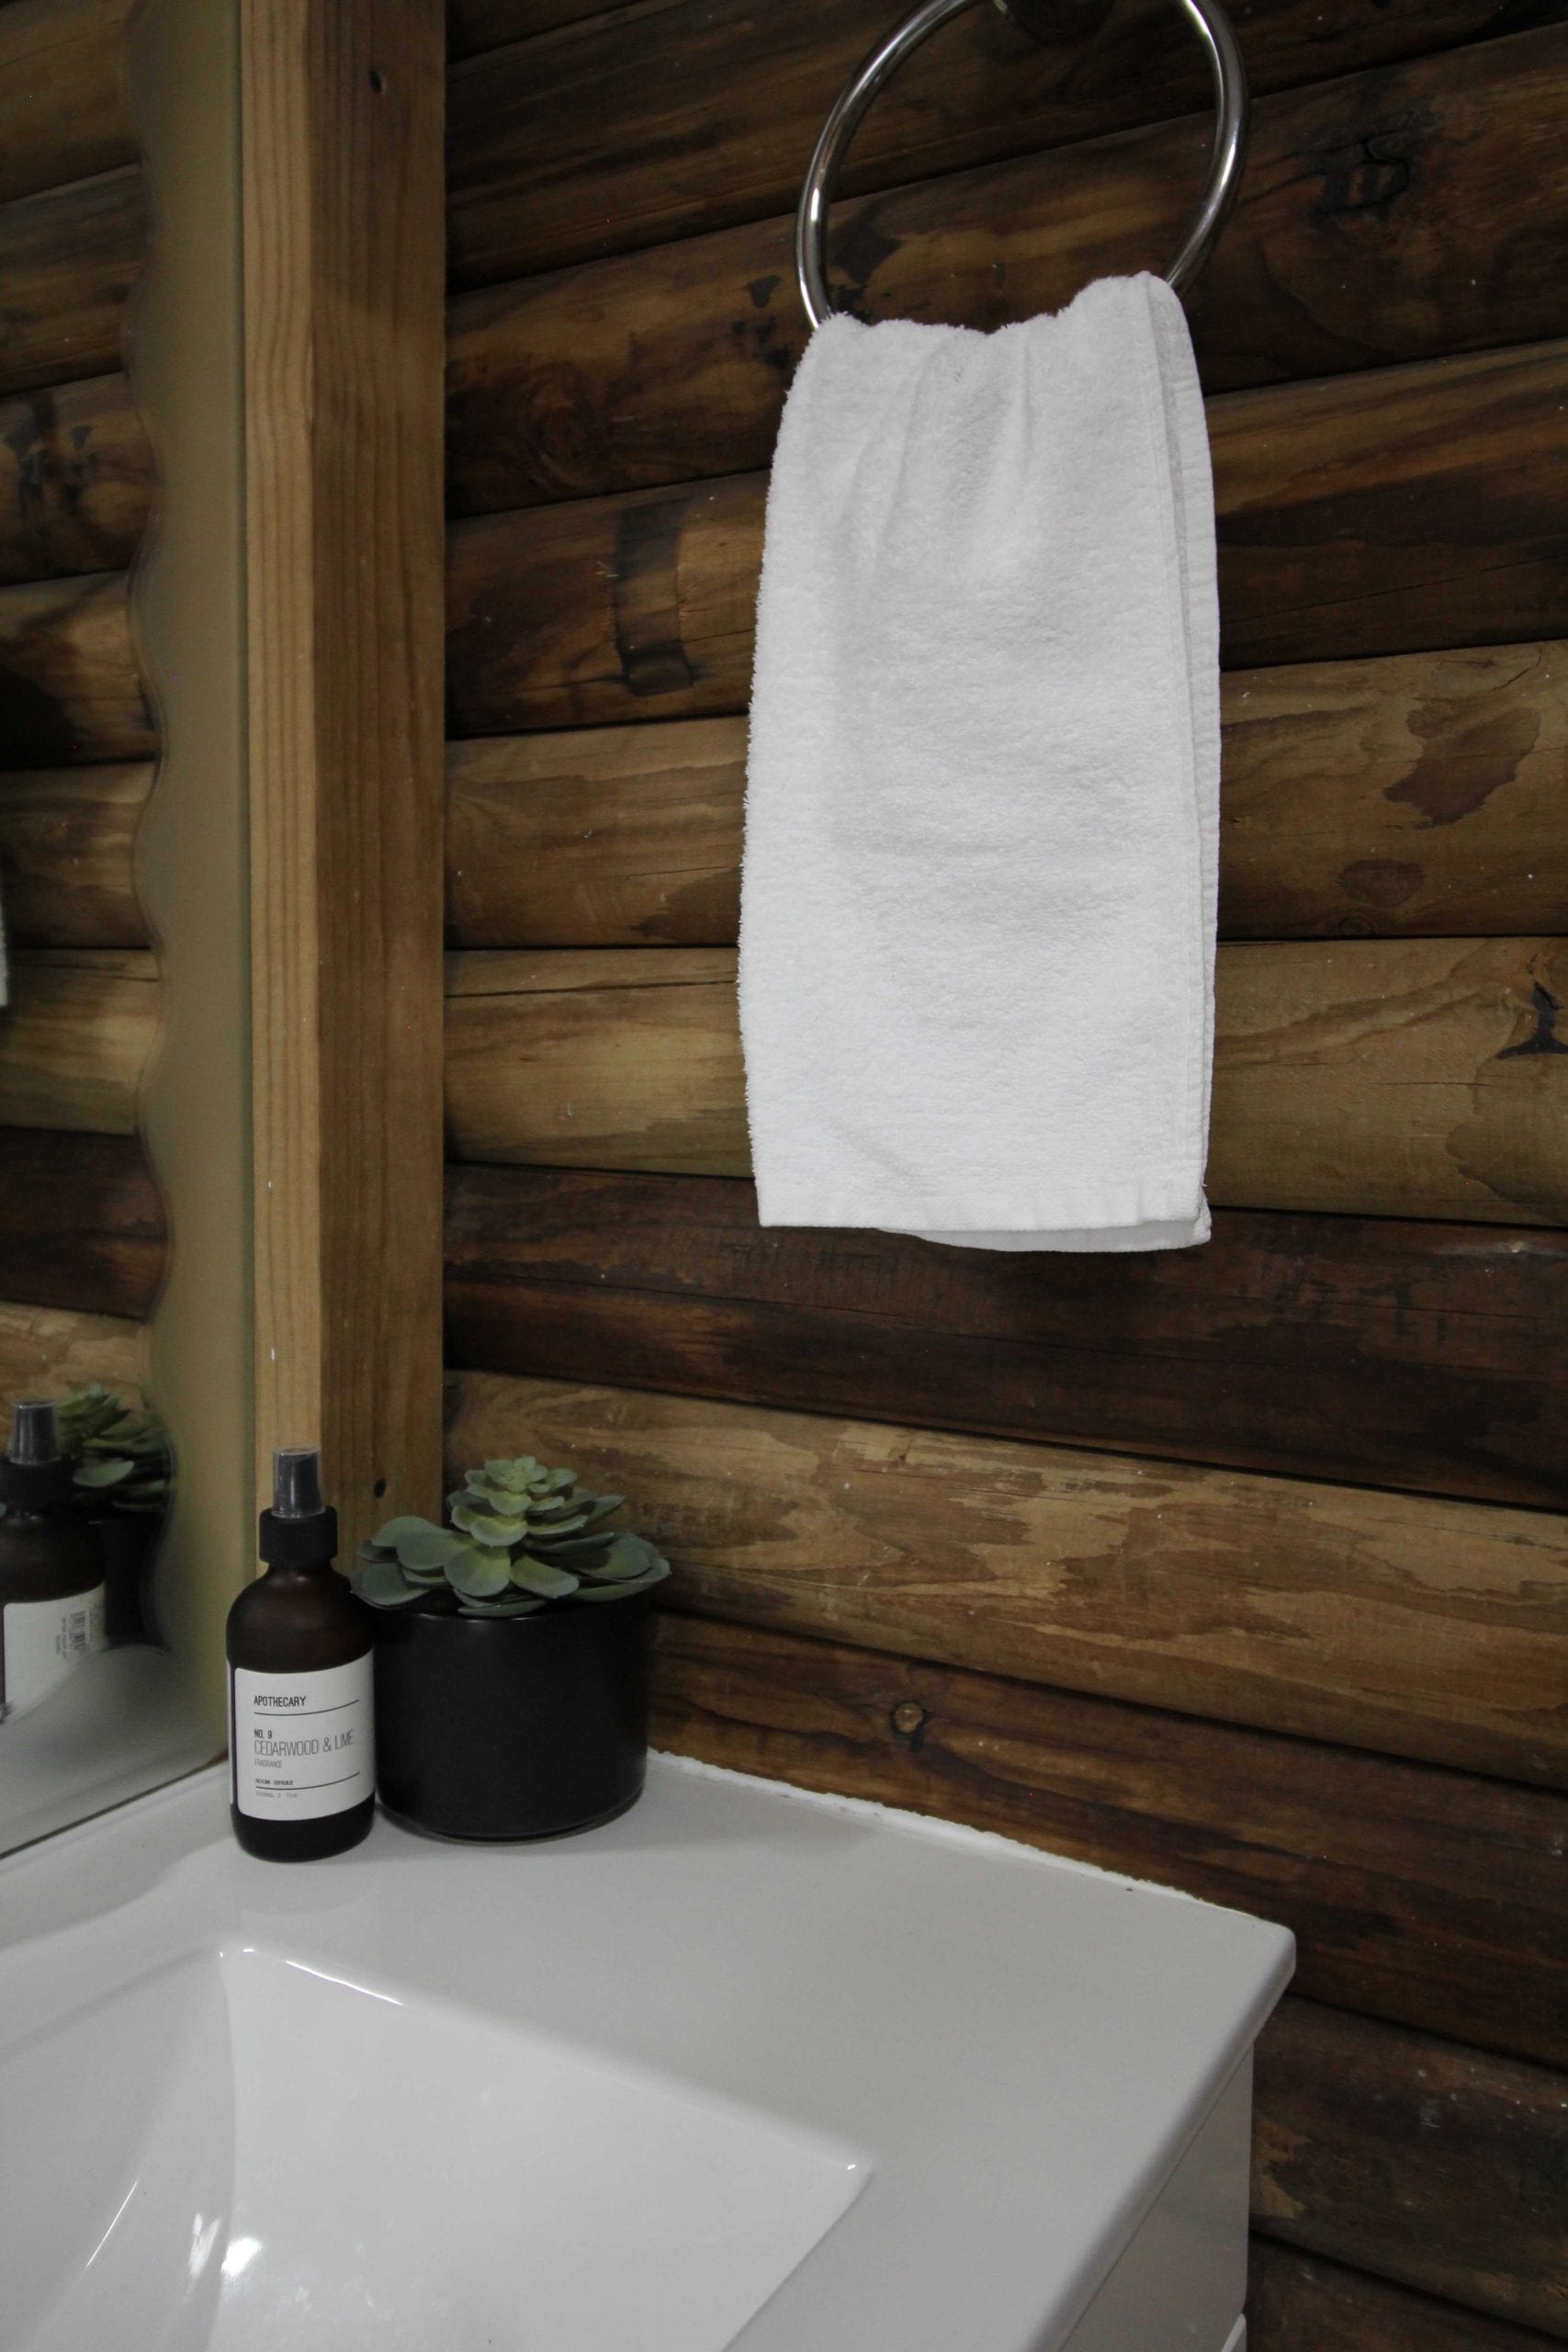 Hand soap and decorative succulent plant in bathroom with hand towel hanging above on the bathroom sink